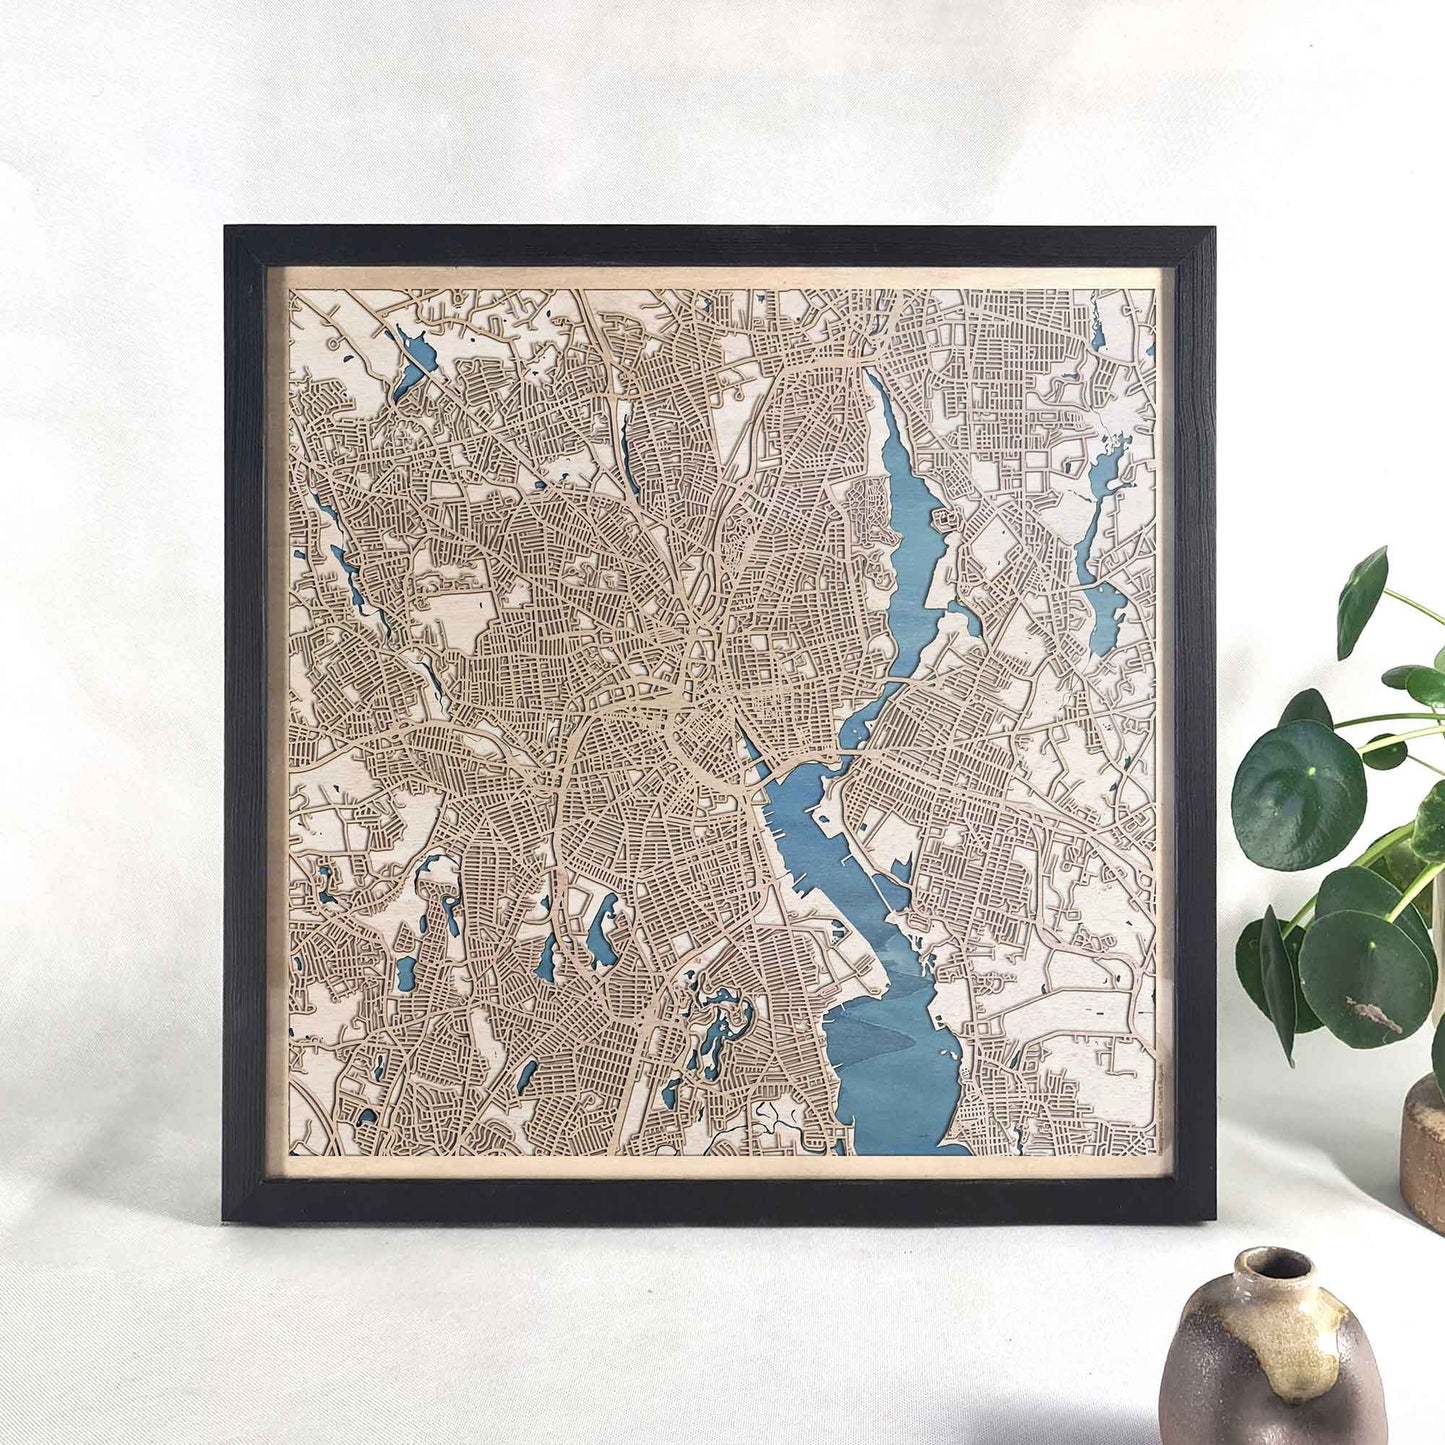 Providence Wooden Map by CityWood - Custom Wood Map Art - Unique Laser Cut Engraved - Anniversary Gift